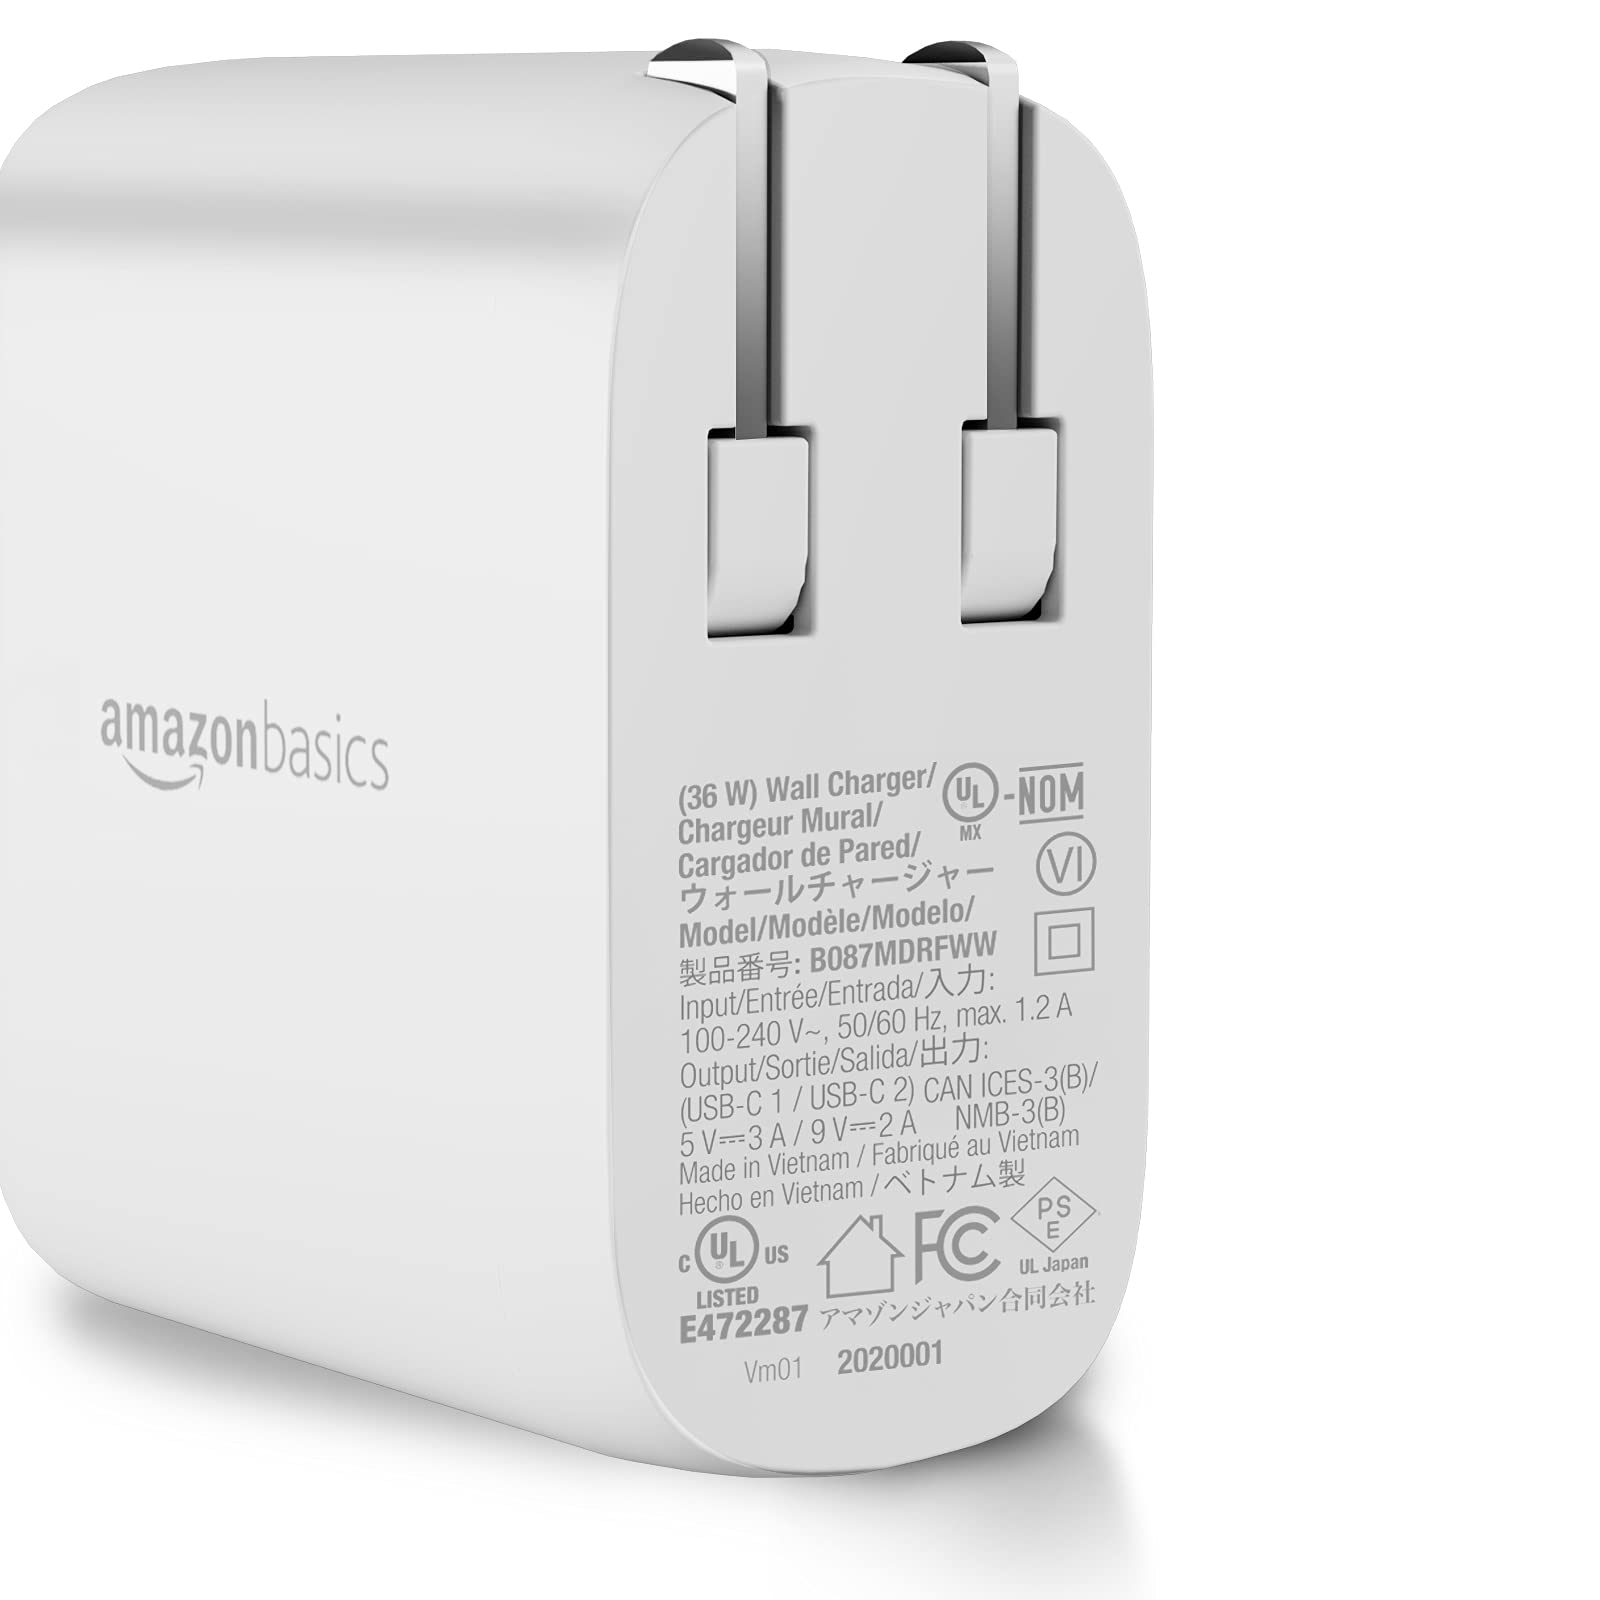 Amazon Basics 36W Two-Port USB-C Wall Charger With Power Delivery PD For Tablets & Phones (iPhone 14/13/12/11/X,iPad,Samsung), White (non-PPS), 2.34 in x 1.09 in x 2.21 in